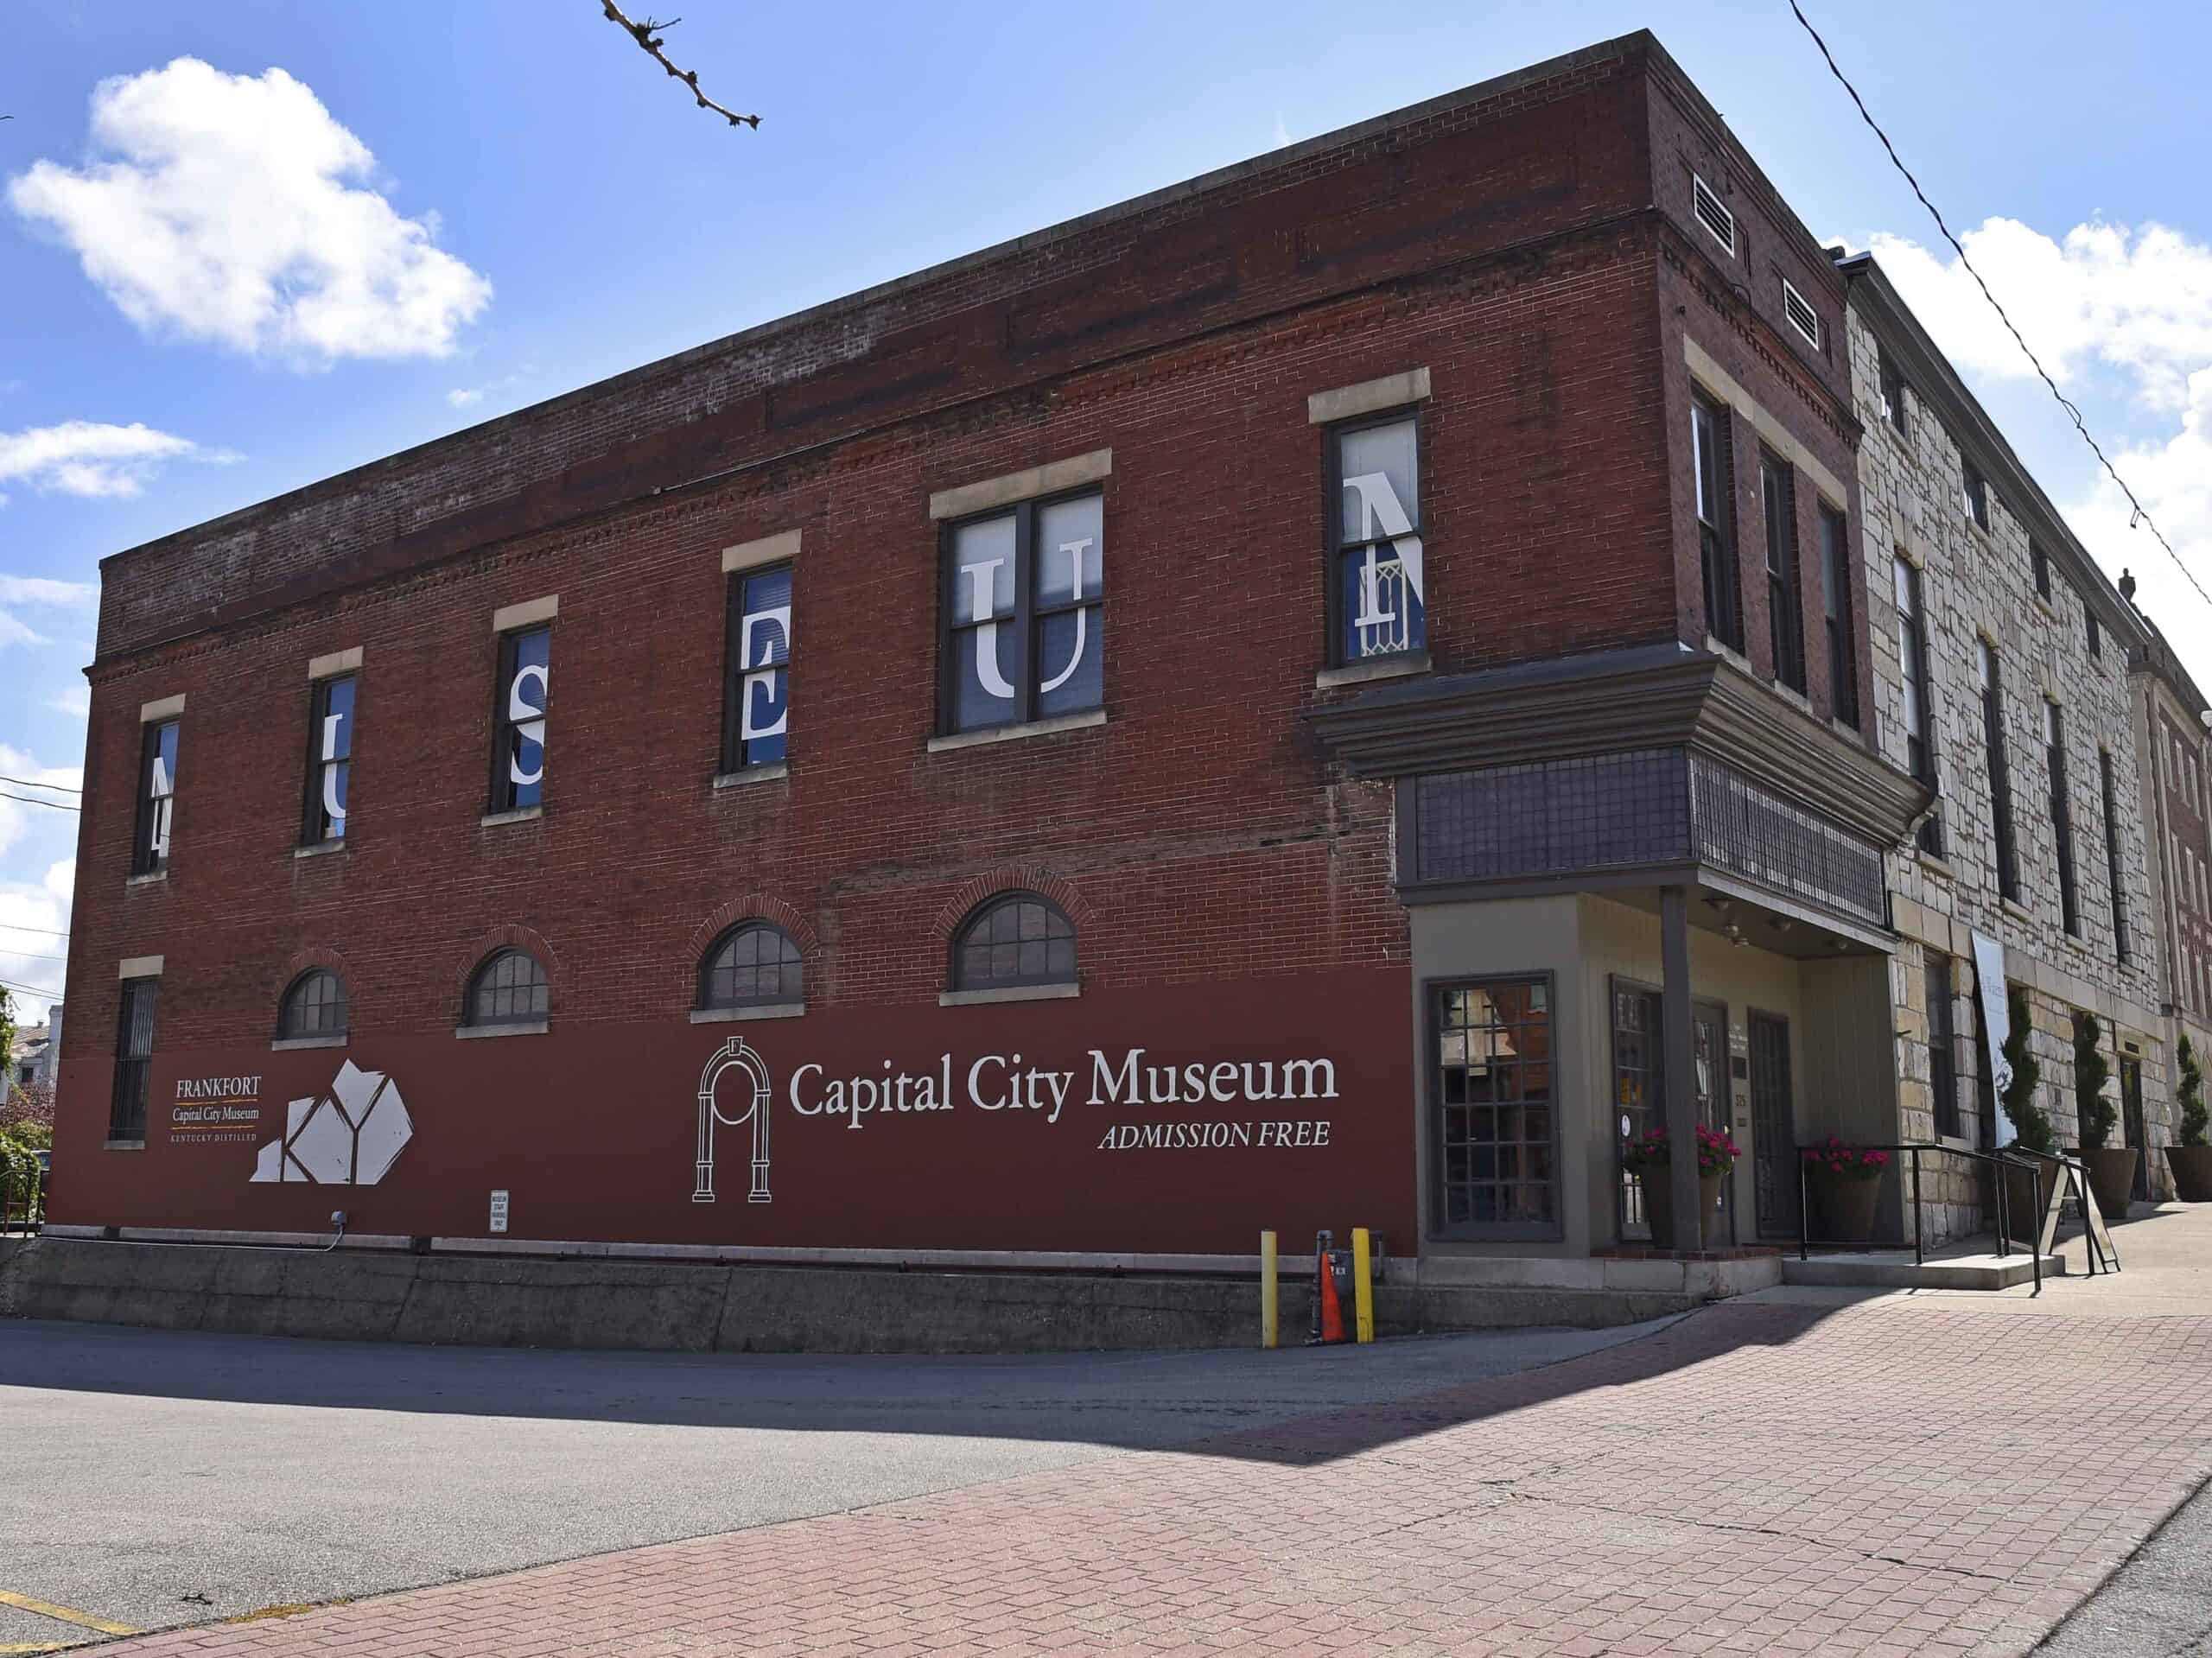 The Capital City Museum is a god place to learn about Frankfort, Kentucky.